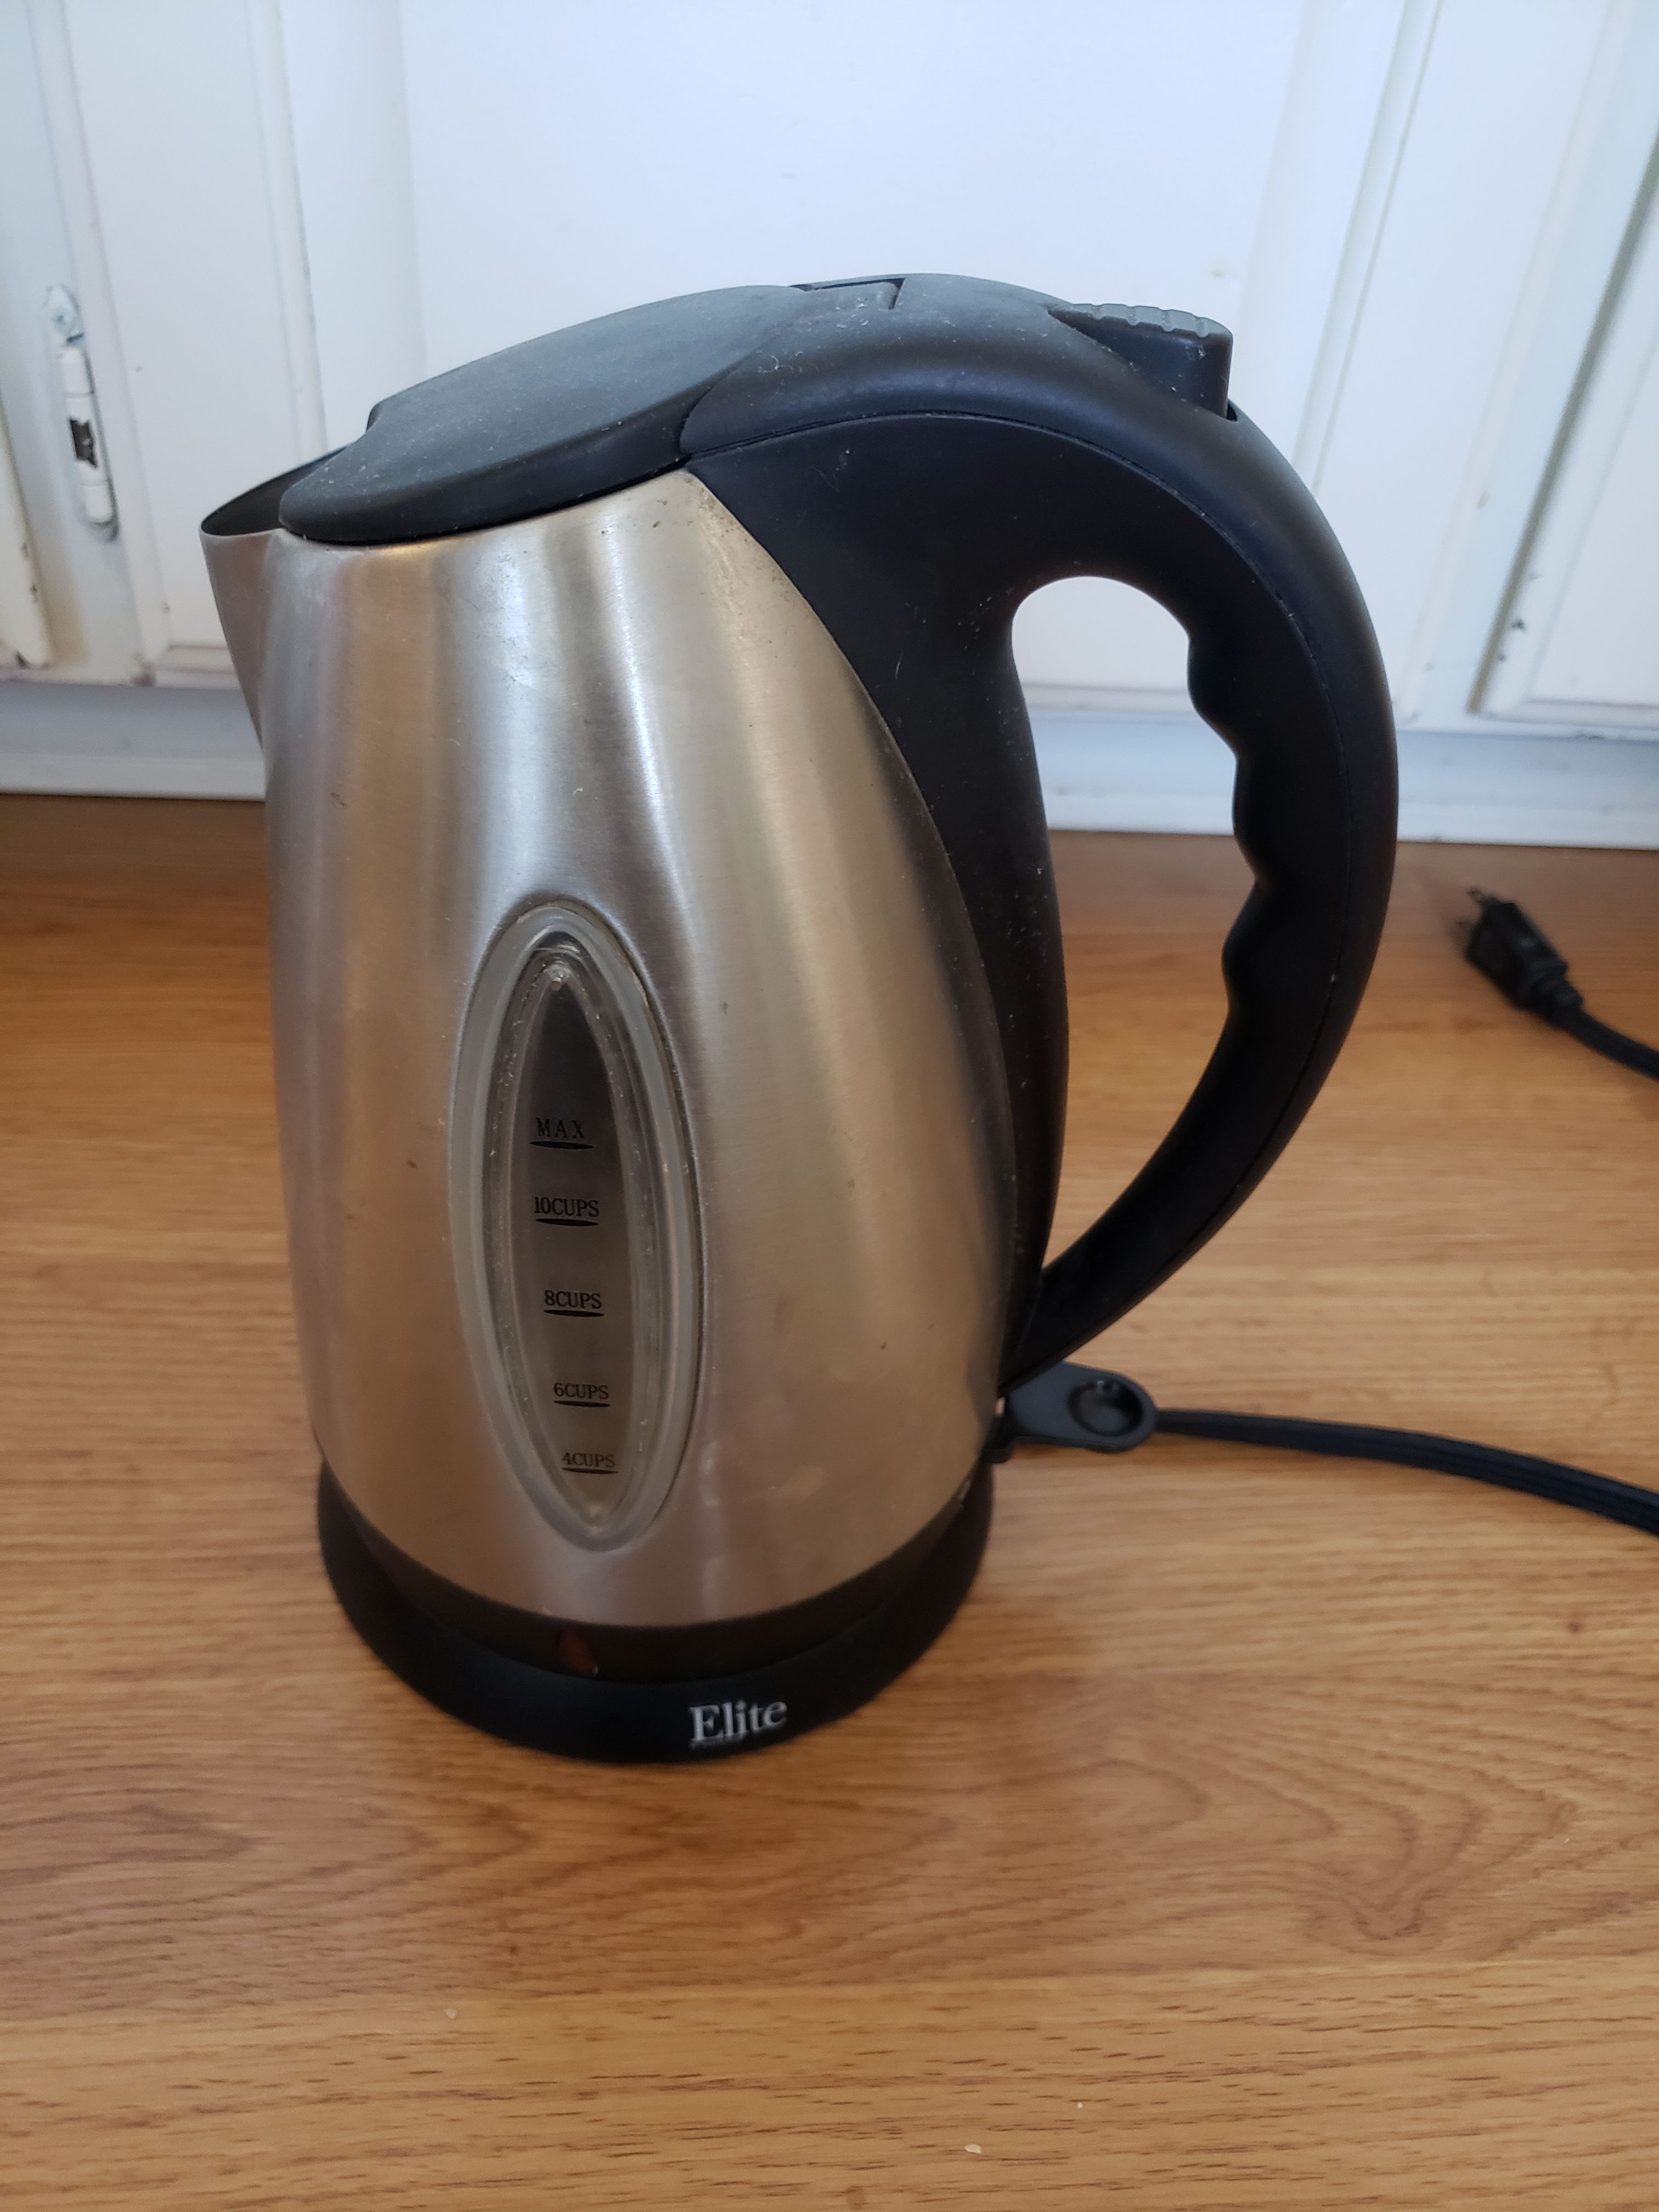 Stainless steel electric kettle. Boiling water in 2 minutes